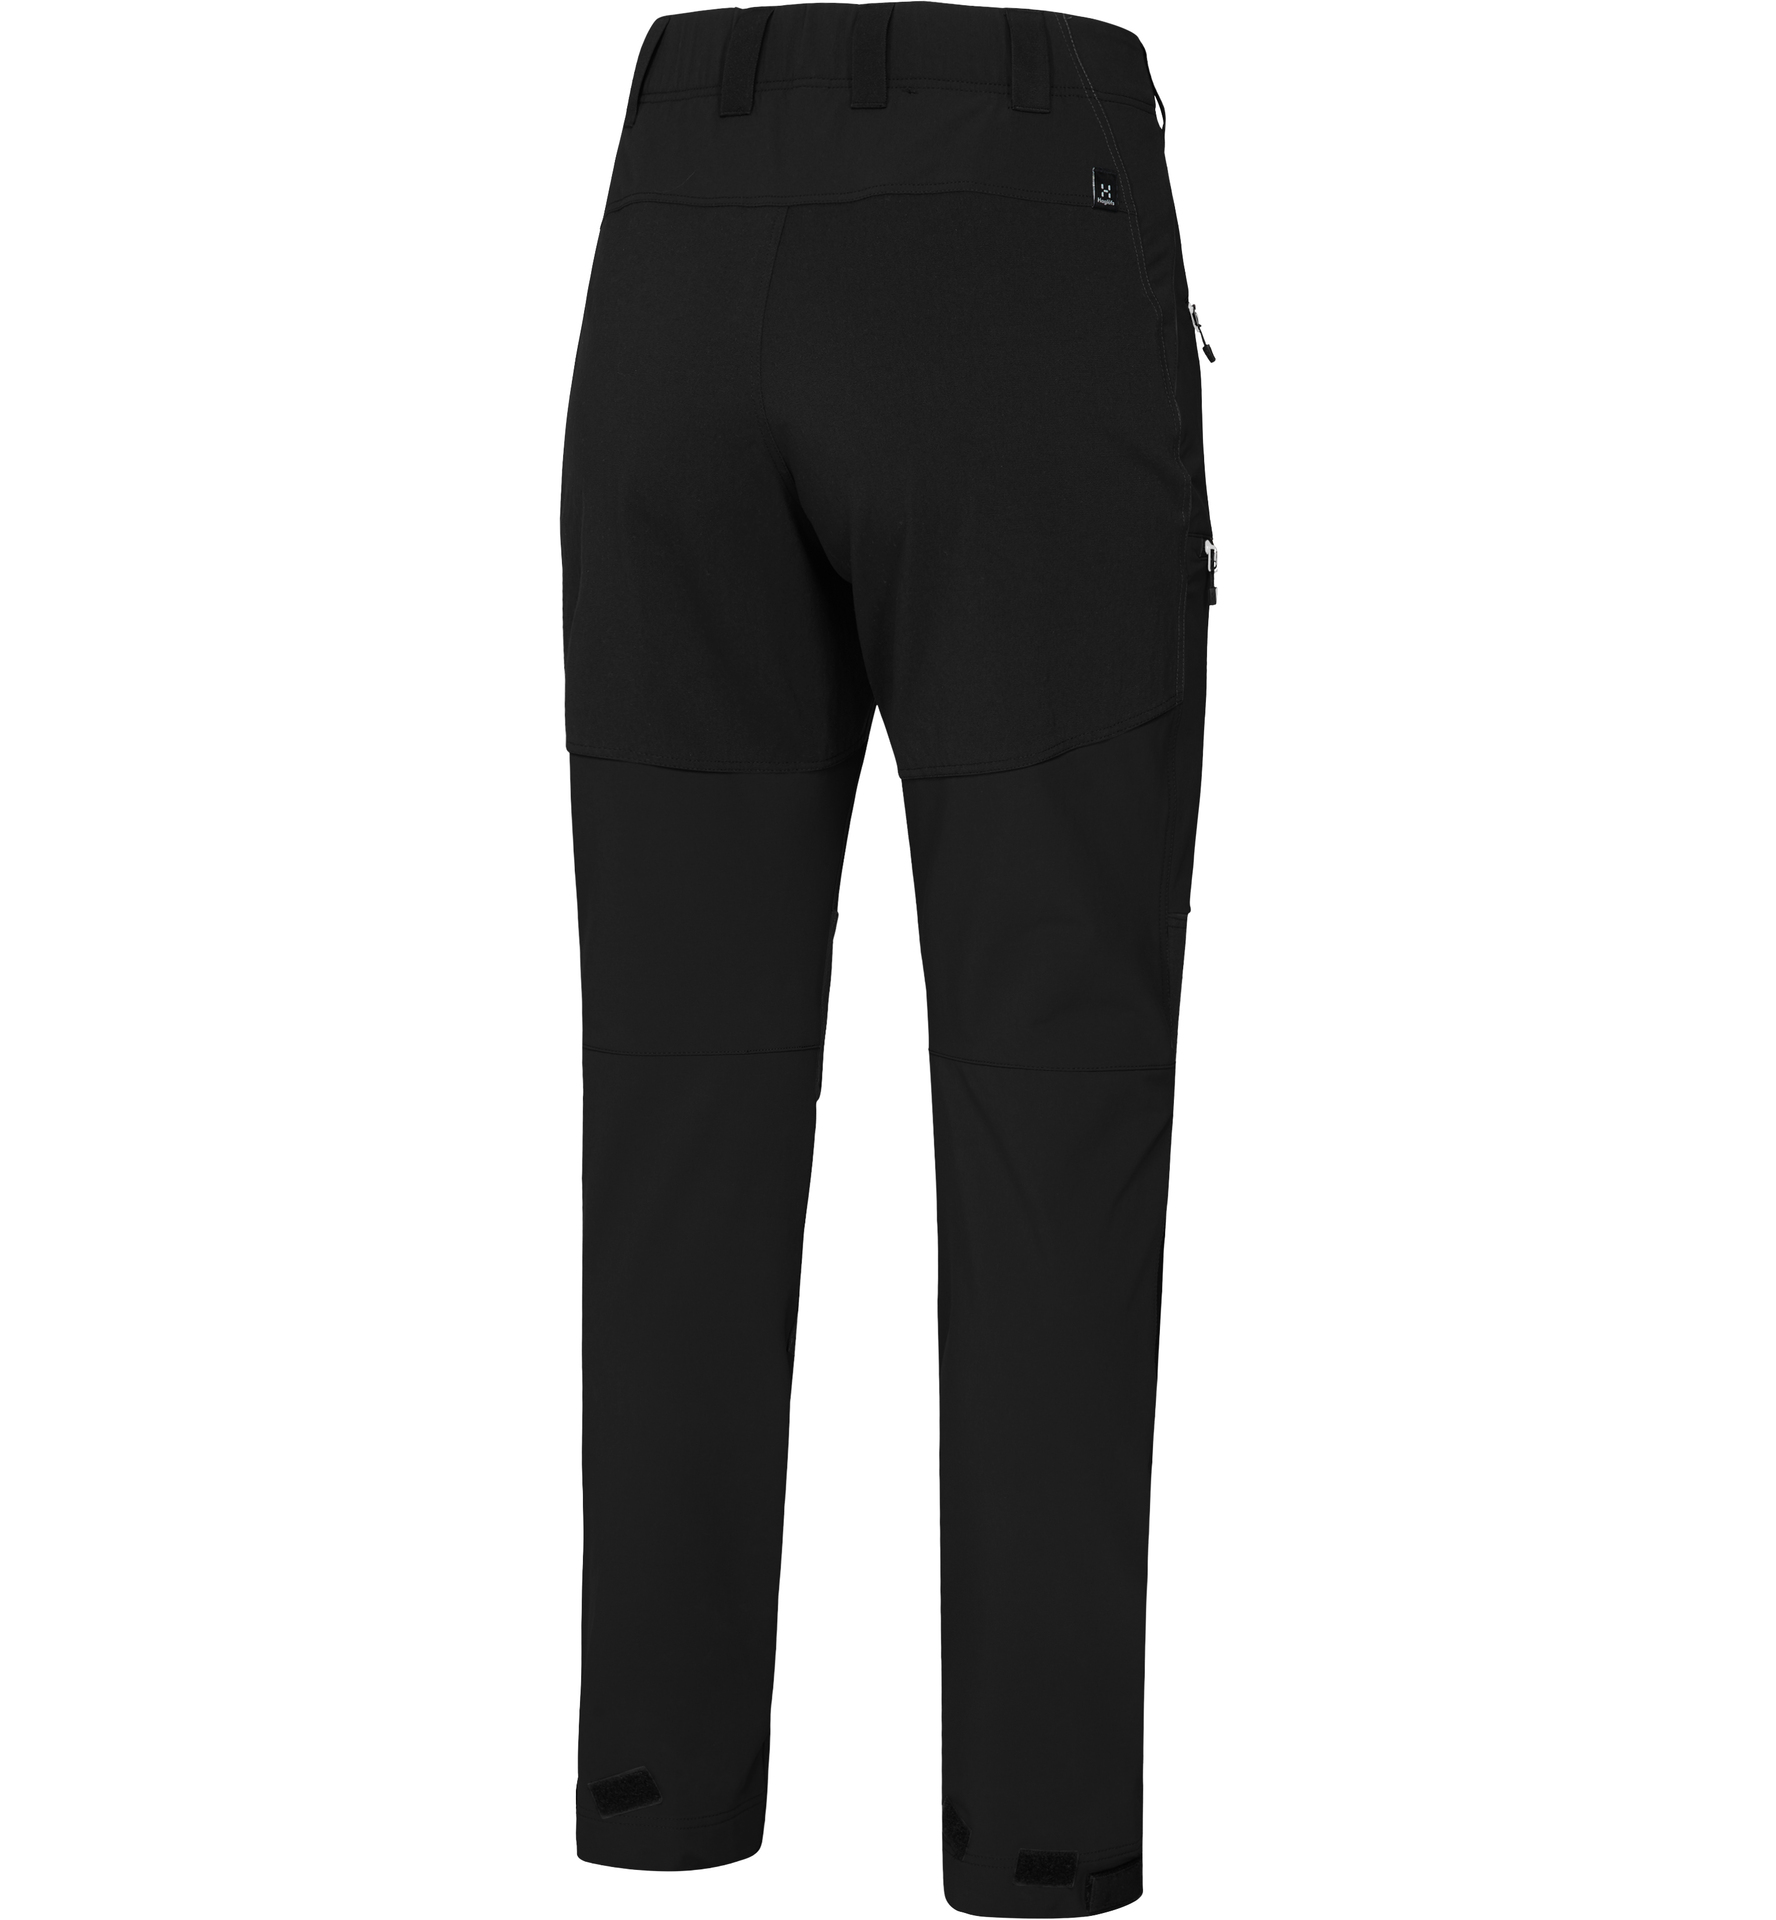 60 Best Ladies Trousers/Pants For 2023 - MyNativeFashion